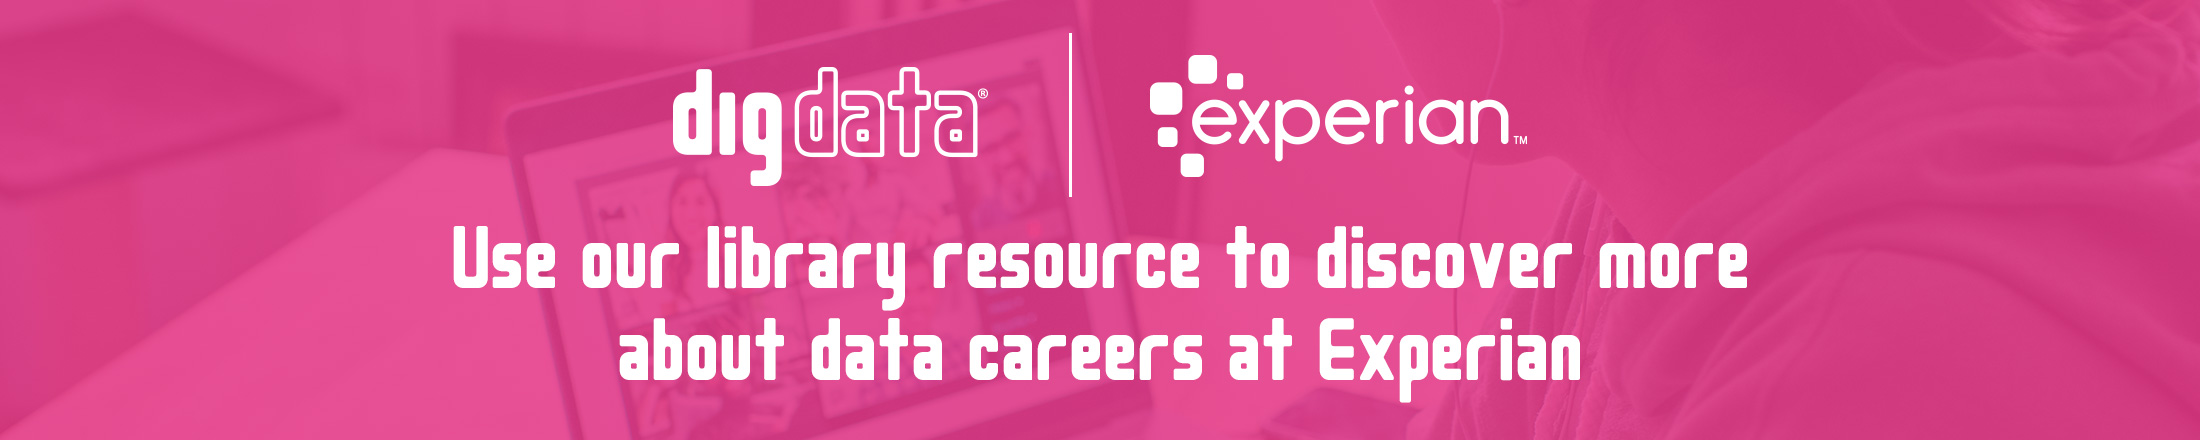 Experian career panel library resource banner